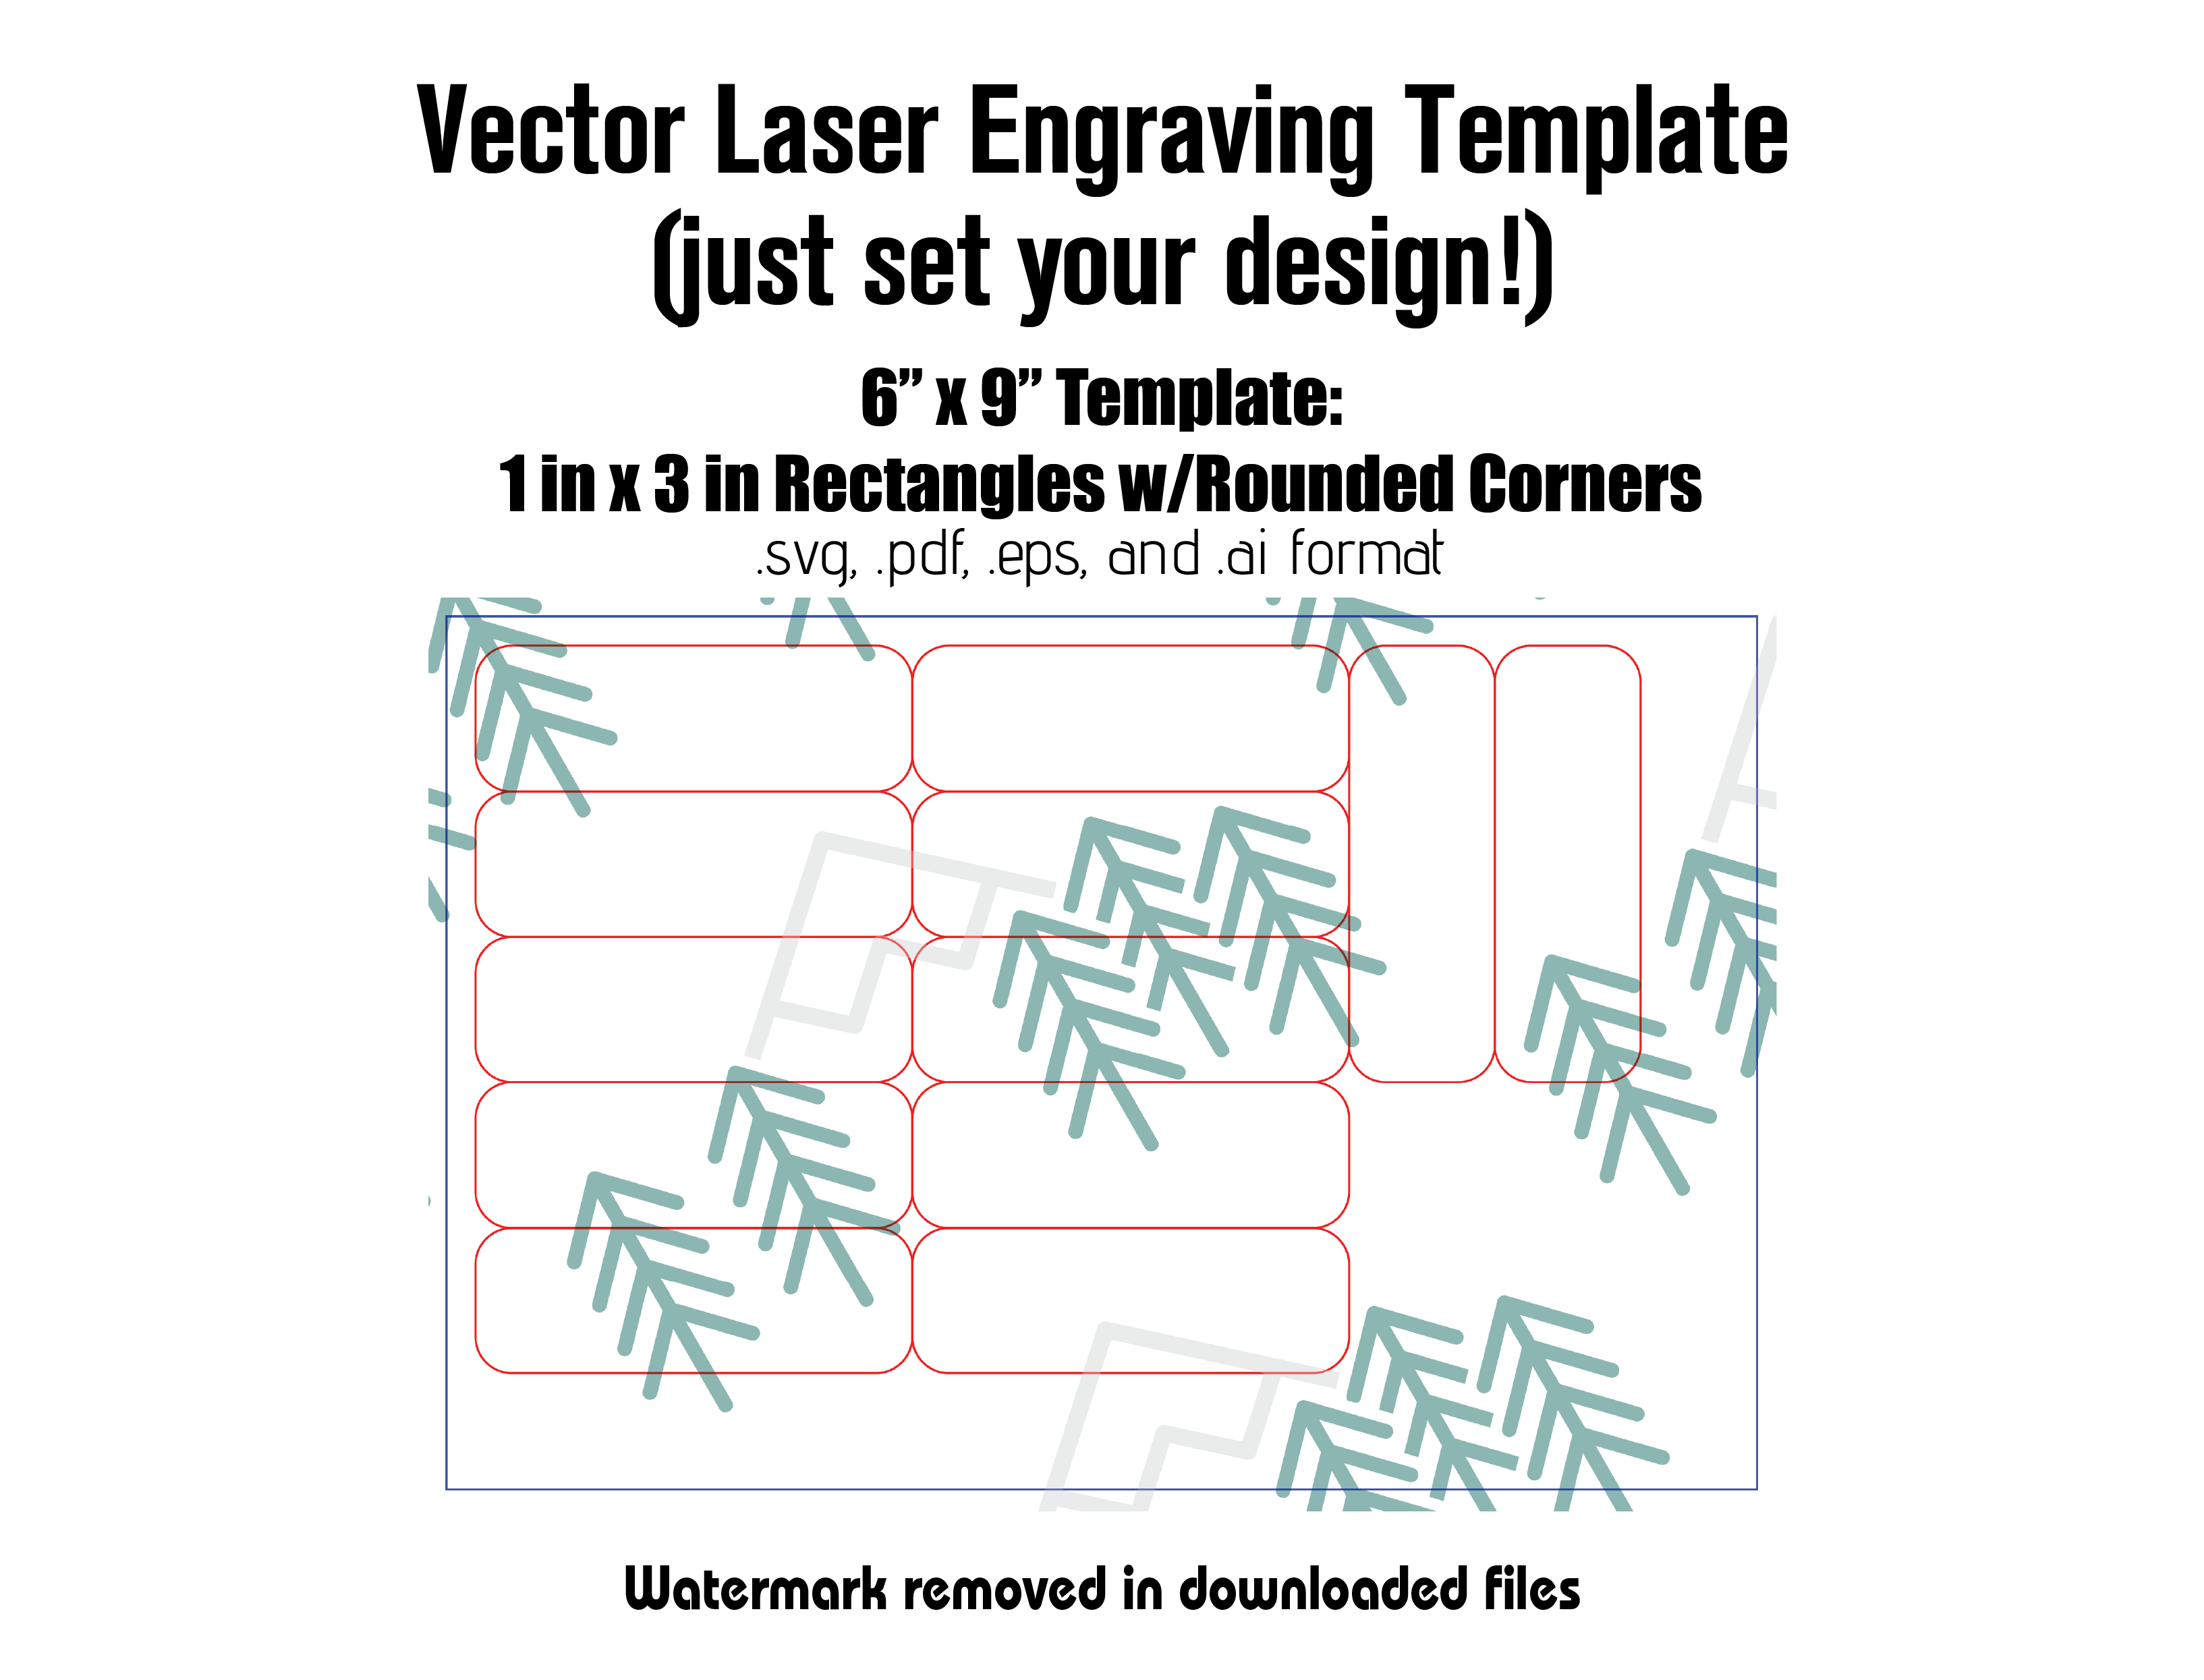 Digital Laser Cutting Template: 1" x 3" Rectangles w/Rounded Corners - 6" x 9" Sheet Size Digital Laser Engraving Files Craftworks NW 